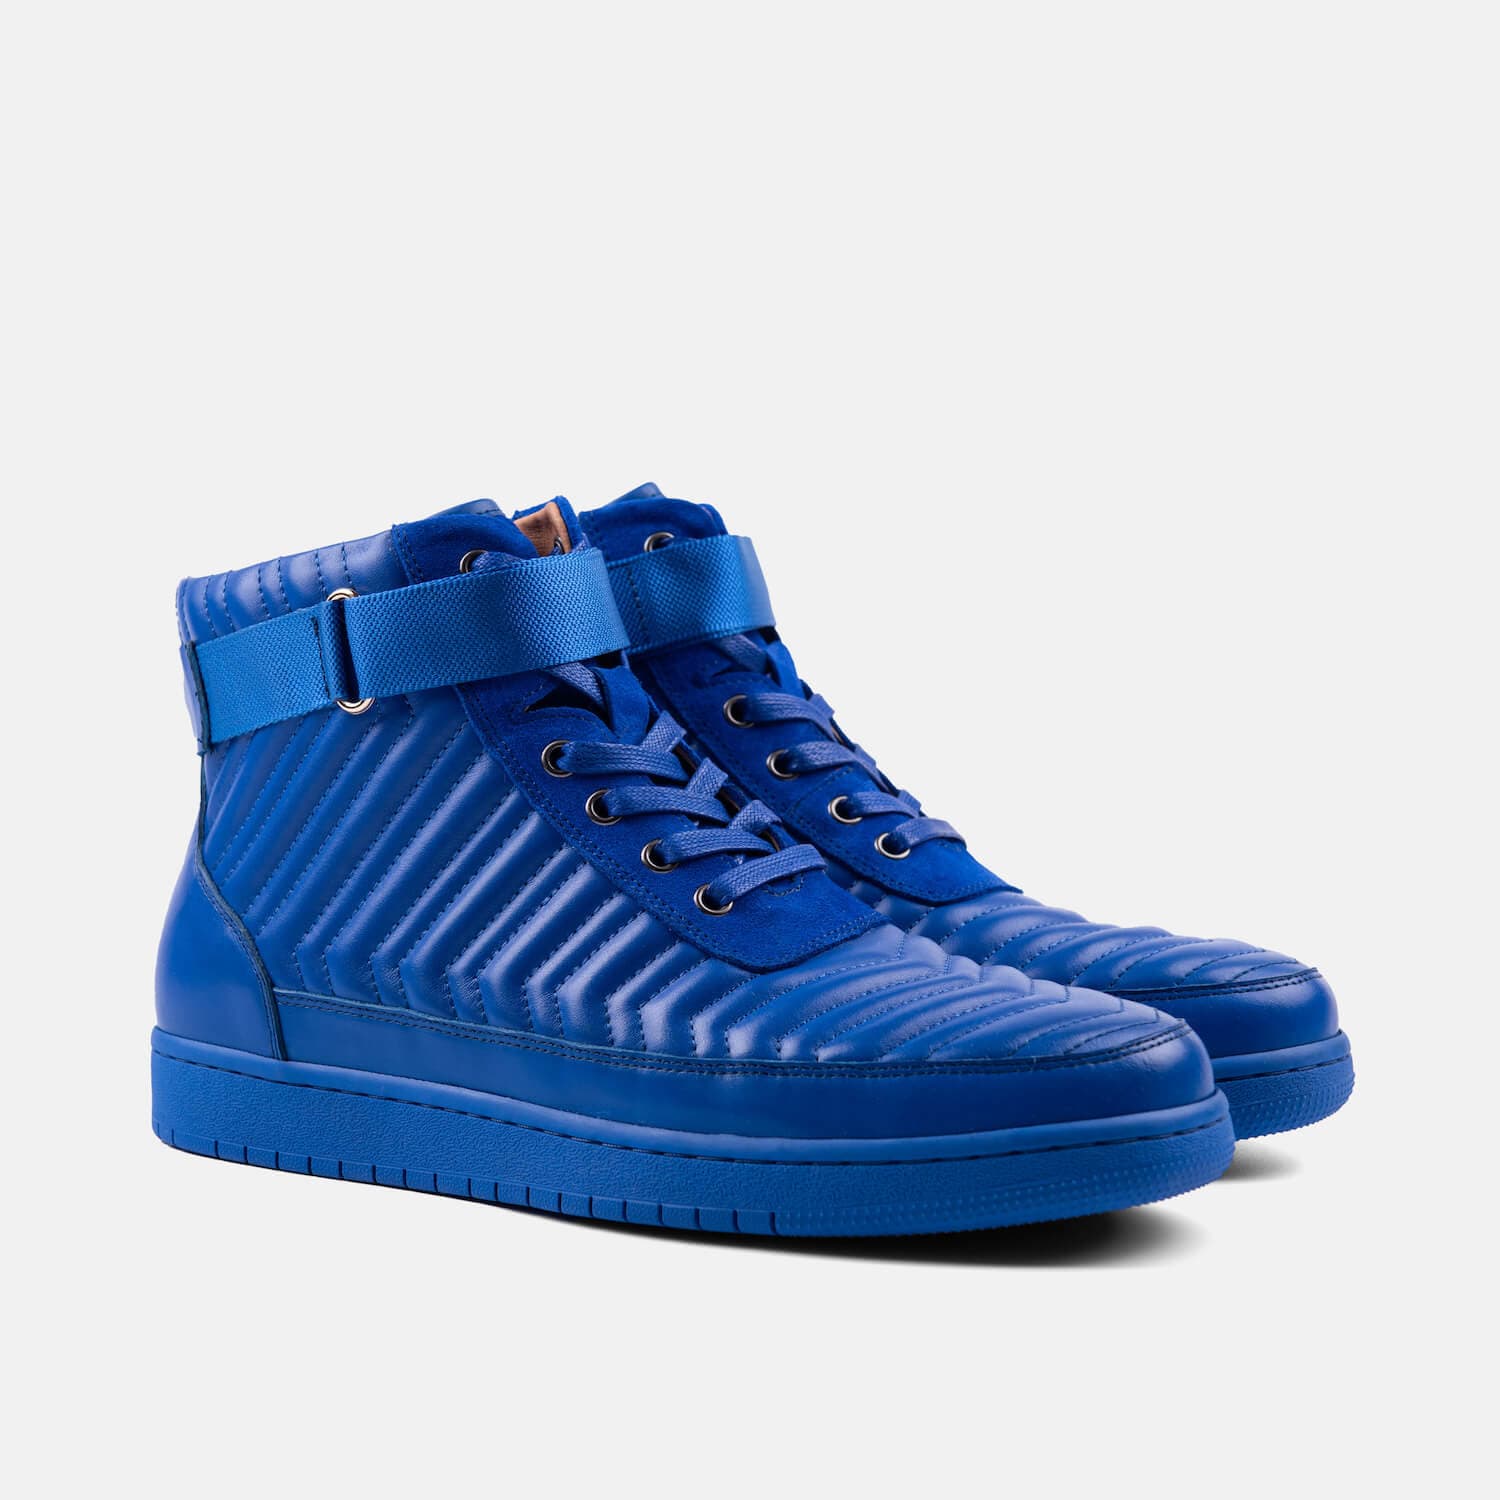 Yesler Brilliant Blue Leather High Top Sneakers